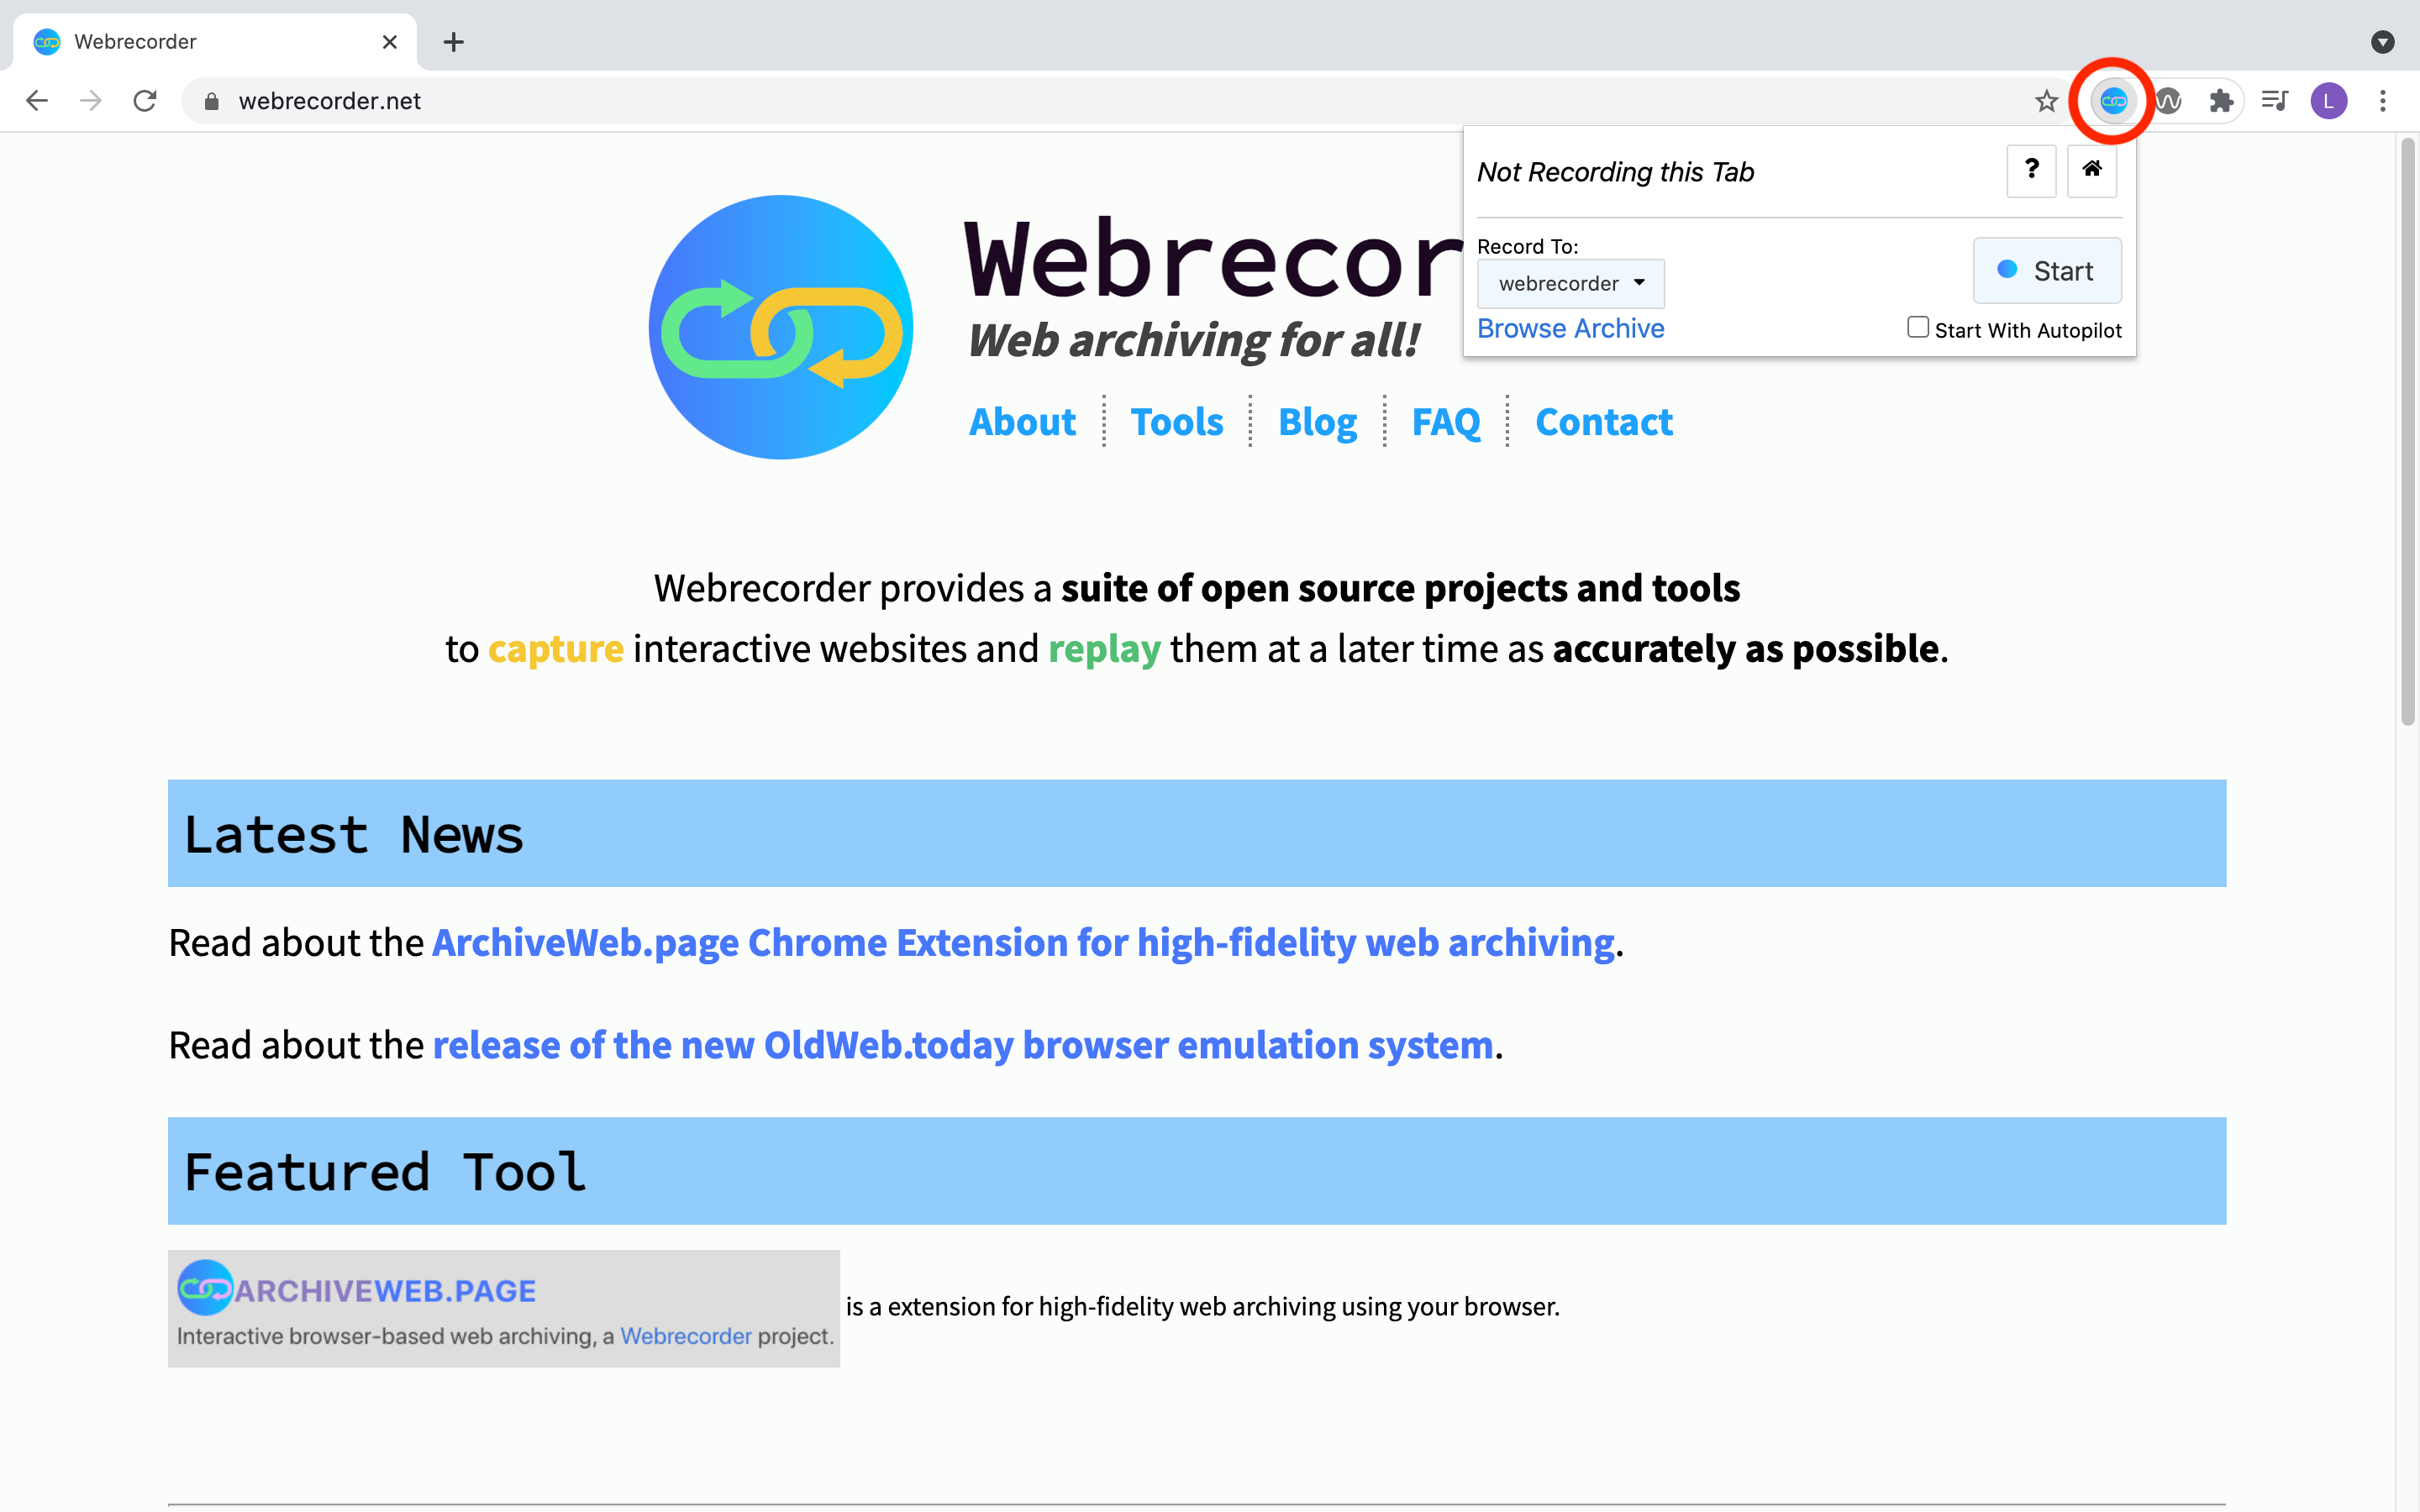 Screenshot of the webrecorder website with the archiveweb.page icon circled red